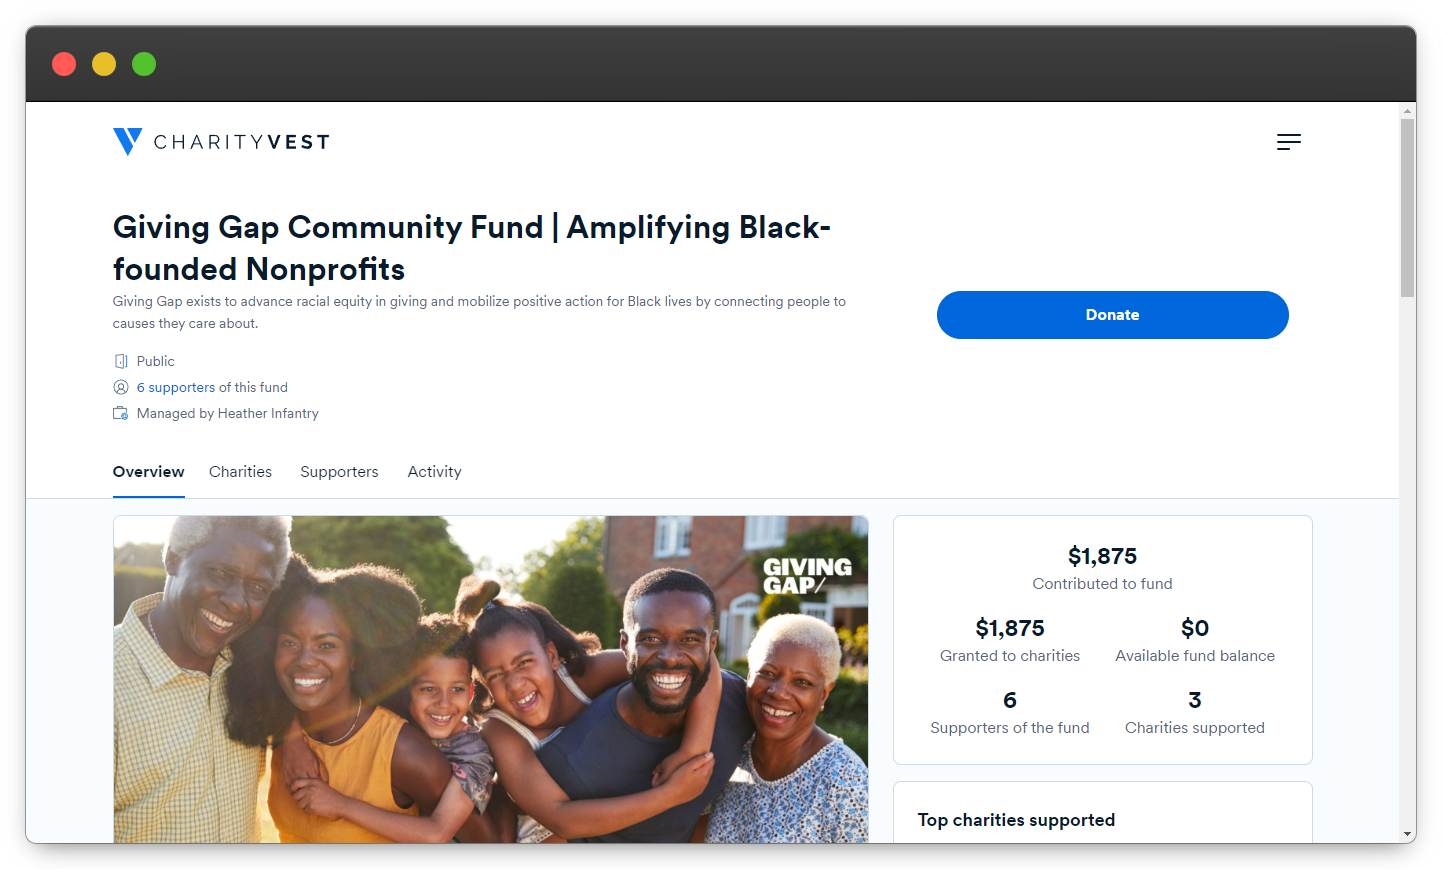 Screenshot of the Chairtyvest page that features the Giving Gap Community Fund.